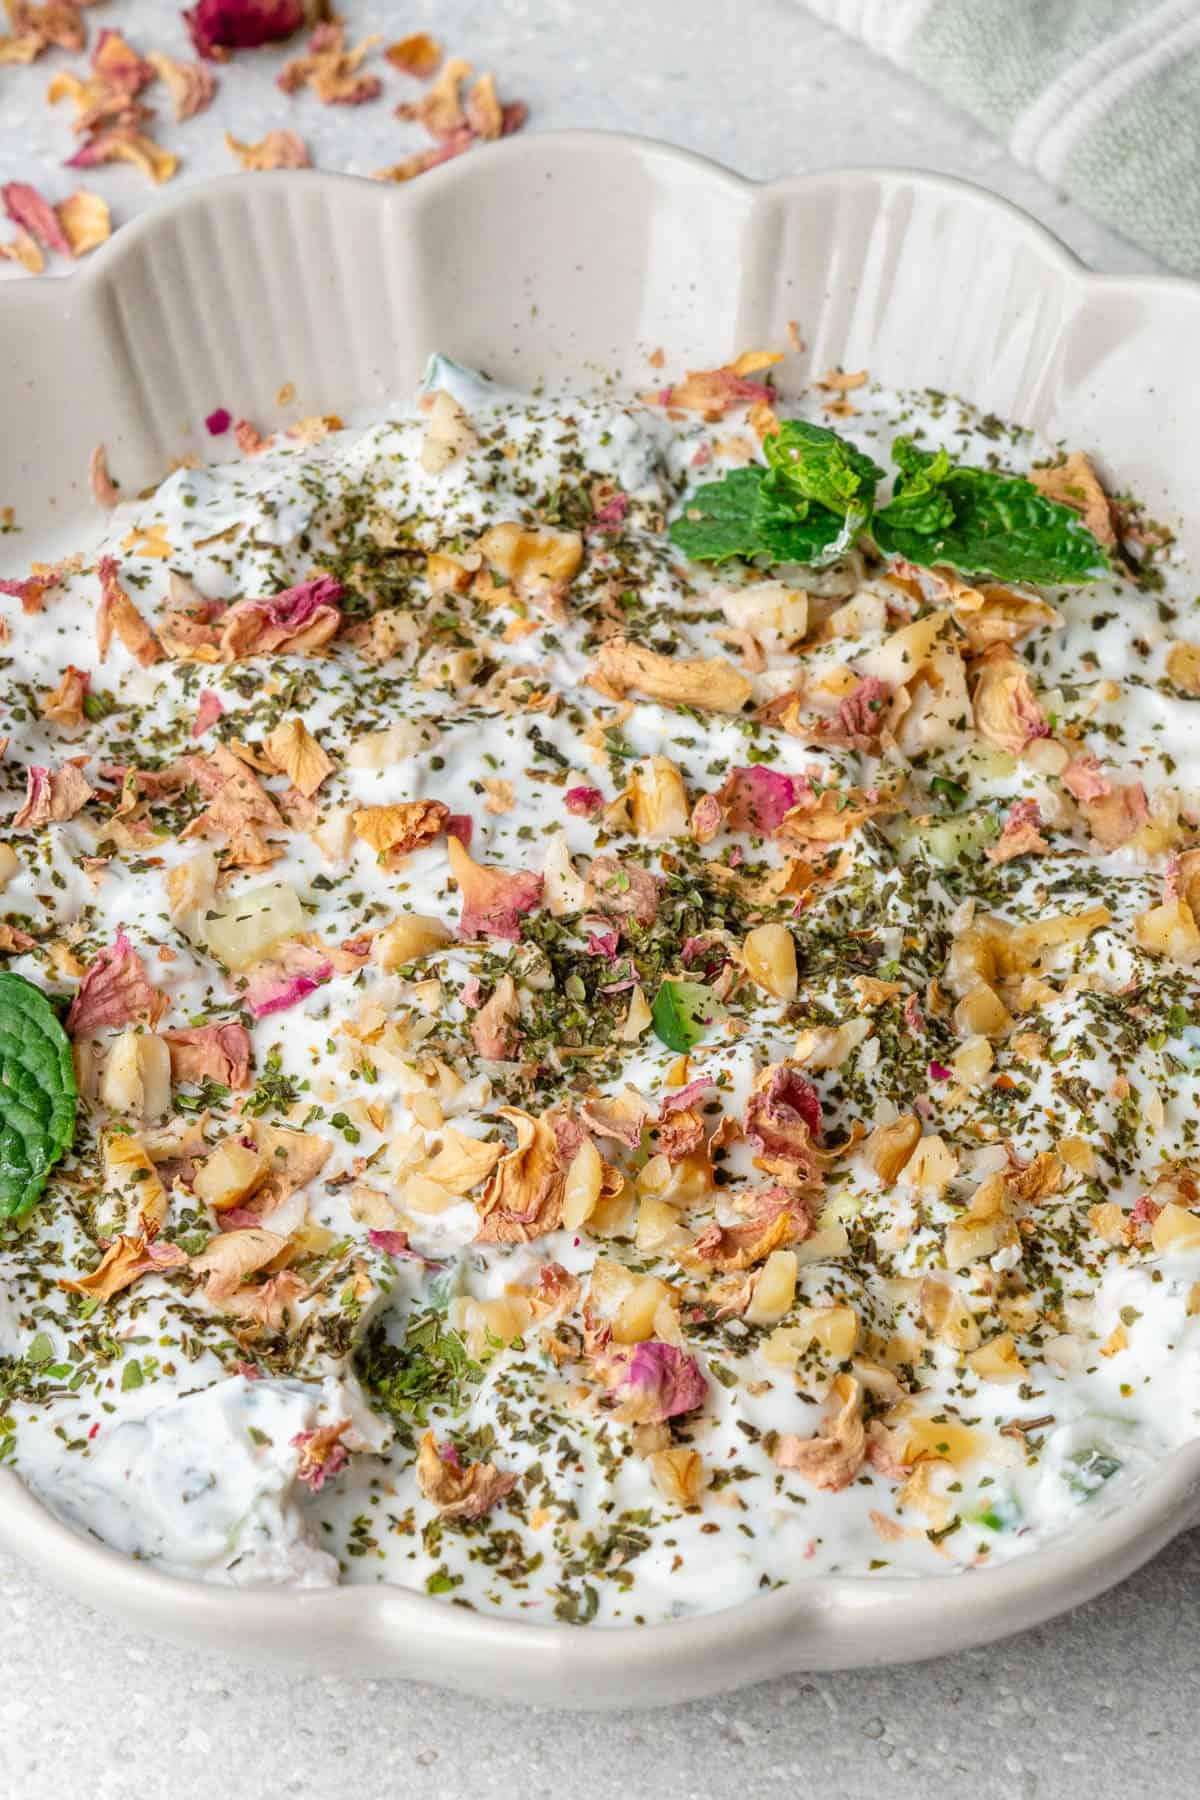 Mast o Khiar topped with mint, walnuts and rose petals